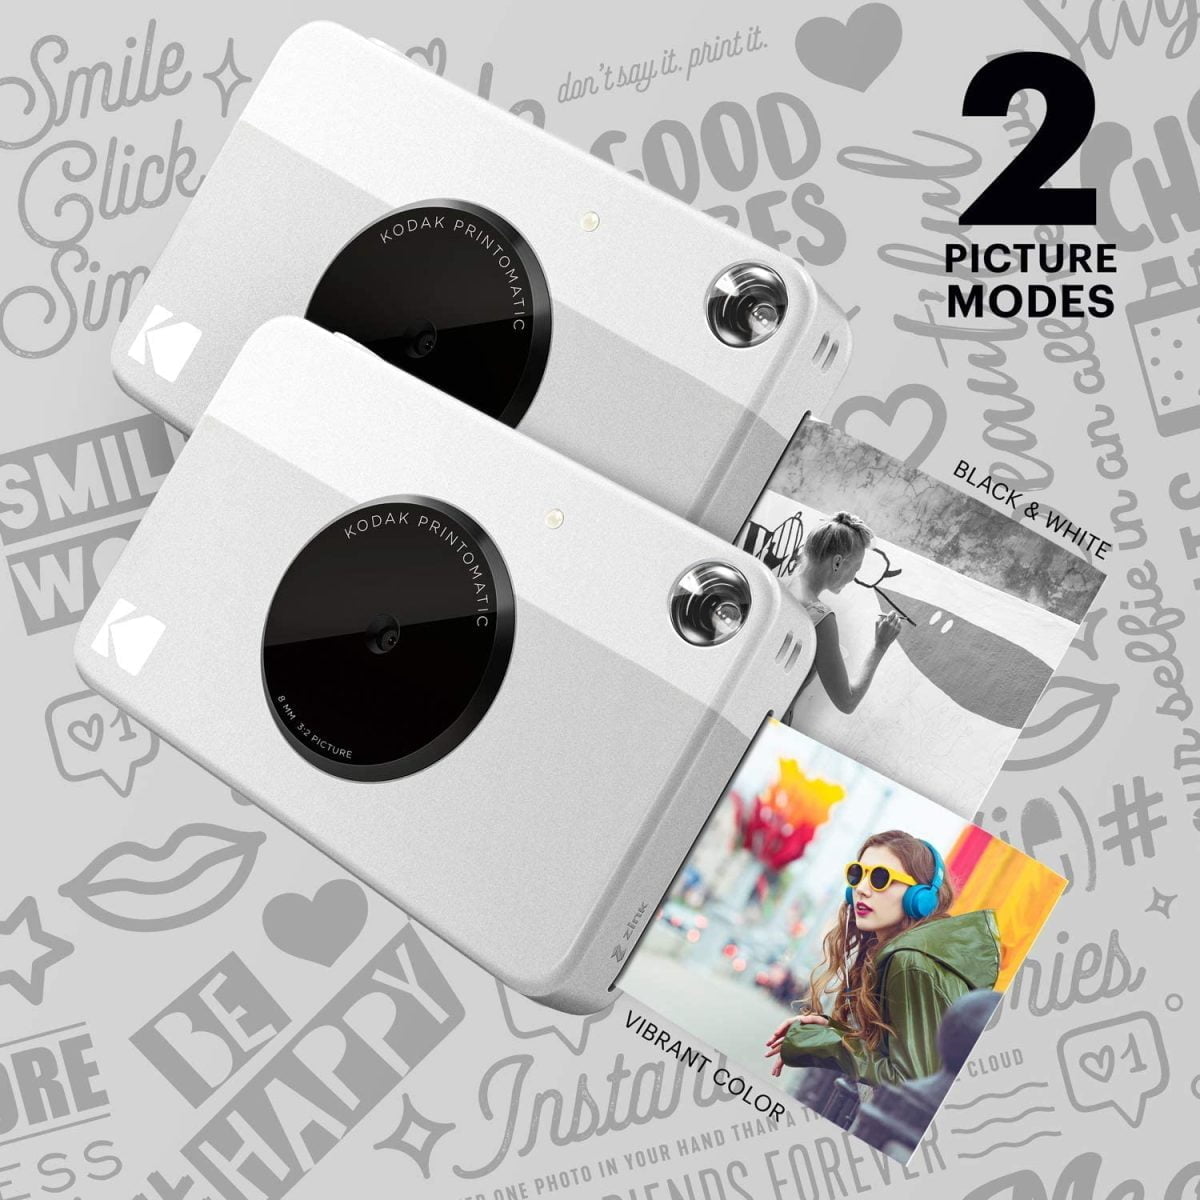 71Zmubmipol. Ac Sl1500 &Lt;H1&Gt;Kodak Printomatic Digital Instant Print Camera - Grey&Lt;/H1&Gt; &Lt;Ul&Gt; &Lt;Li&Gt;Fast Easy And Fun - Forget Computers. Forget Cumbersome Printers Just Point And Shoot The Camera'S Speed Allows You To Shoot A New Photo While Printing The Previous Shot It Also Comes Equipped With A Light Sensor That Will Automatically Turn On The Flash In Low-Light Settings. No Computer Necessary&Lt;/Li&Gt; &Lt;Li&Gt;One-Stop Printing - The Kodak Printomatic Camera Instantly And Automatically Prints High-Quality Vibrant 2 X 3 Inch Photos. The Camera Uses Kodak Zink Photo Paper, So No Ink Cartridges, Toners Or Film Are Needed&Lt;/Li&Gt; &Lt;Li&Gt;The Photo Prints Are Durable, Water-Resistant, Tear-Resistant, Smudge-Free And Adhesive-Backed&Lt;/Li&Gt; &Lt;Li&Gt;The Kodak Printomatic Camera Is Fast, Fun, And Easy To Use Providing You With On-The-Spot Results.&Lt;/Li&Gt; &Lt;Li&Gt;Charming Design - Comes In A Variety Of Fun, Bold Colours; Compact In Size Slips Neatly Even Into Your Shirt Pocket Make It Easy To Carry Around As You Go About Your Day, Ensuring You Always Have It On Hand&Lt;/Li&Gt; &Lt;Li&Gt;Instant Value - Despite Its Many Digital Technological Advancements The Kodak Printomatic Camera Is An Easy-To-Use And An Accessible-To-All Product At A Price Point You Would Expect To Pay For An Analogue Instant Camera The Camera Has Slots For Attaching A Neck Strap And Saves Photos To A Microsd Card&Lt;/Li&Gt; &Lt;/Ul&Gt; Kodak Kodak Printomatic Digital Instant Print Camera - Grey